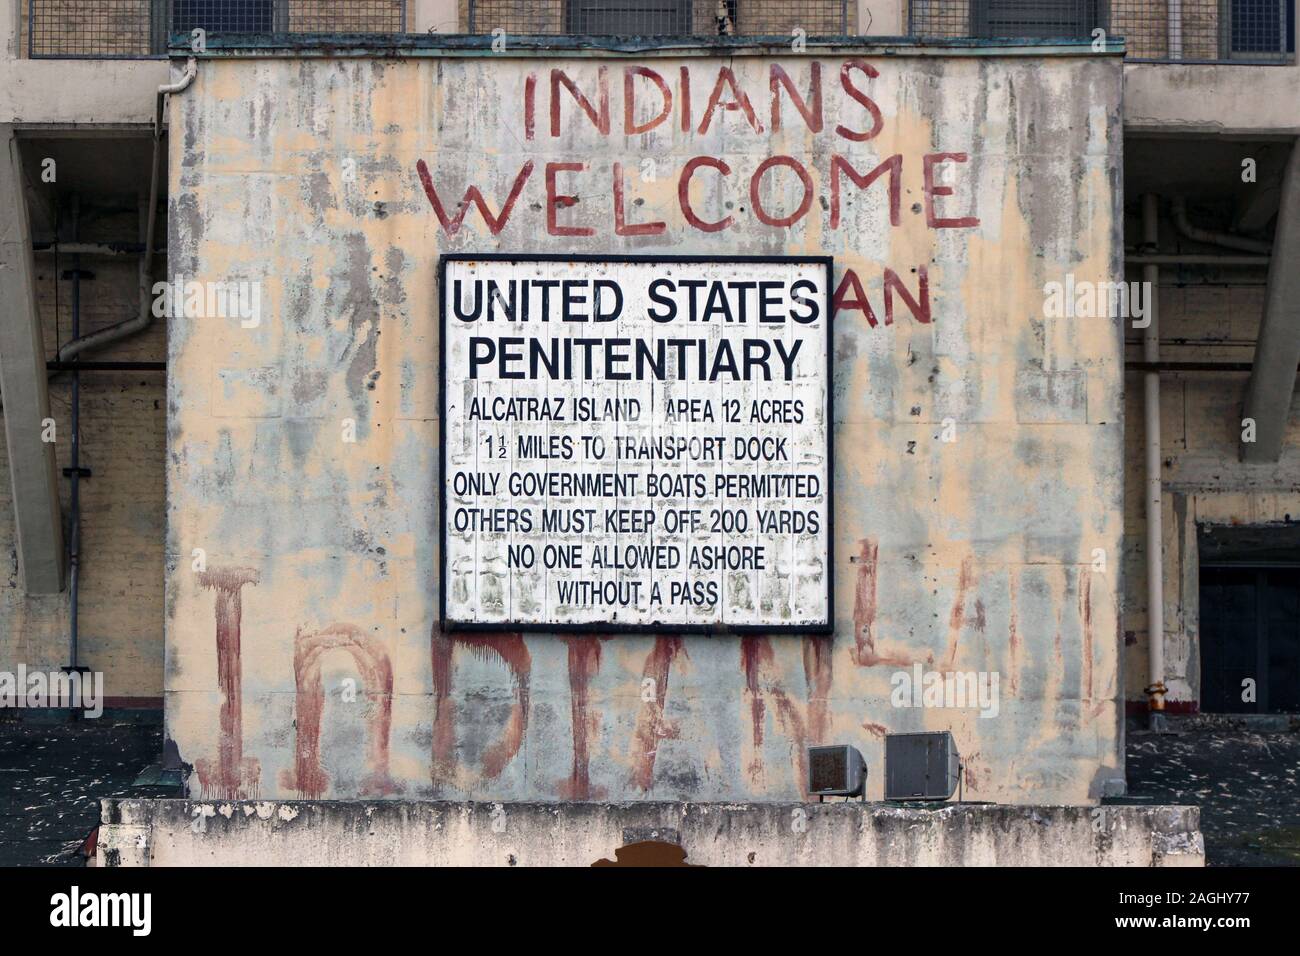 Restored Indian graffiti from 1969-1971 and a warning sign in Alcatraz prison in San Francisco, United States of America Stock Photo